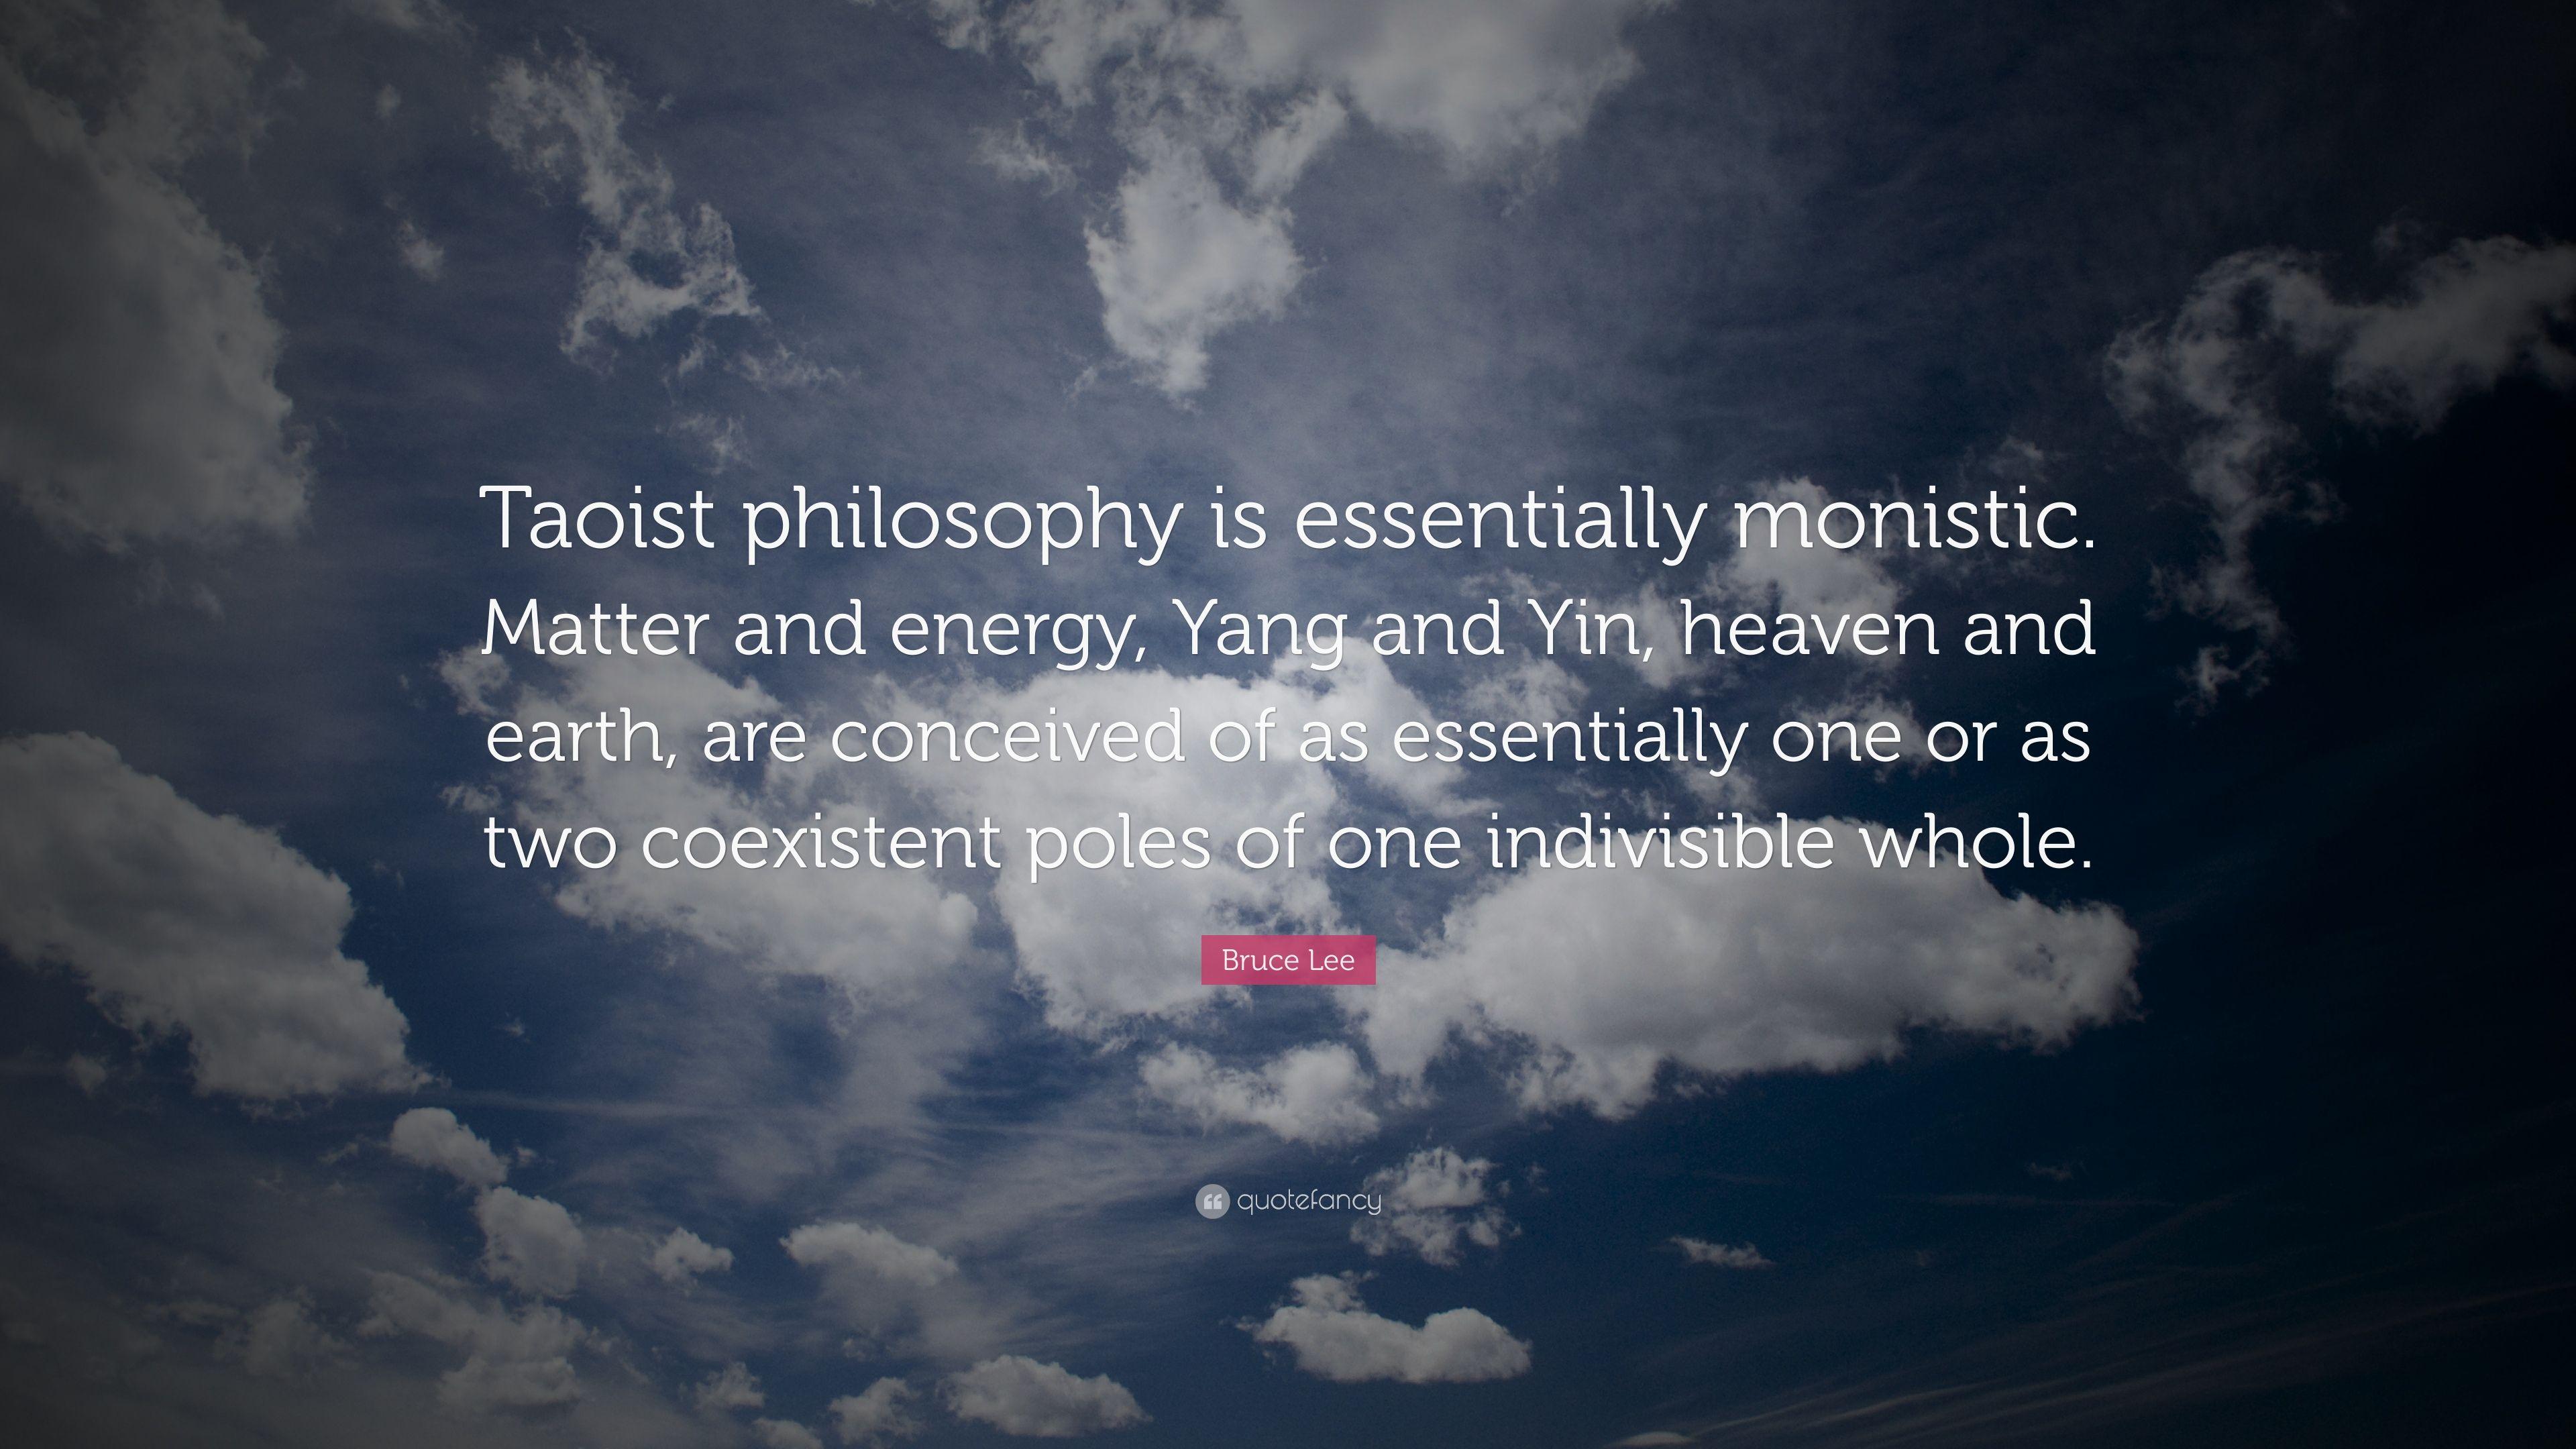 Bruce Lee Quote: “Taoist philosophy is essentially monistic. Matter